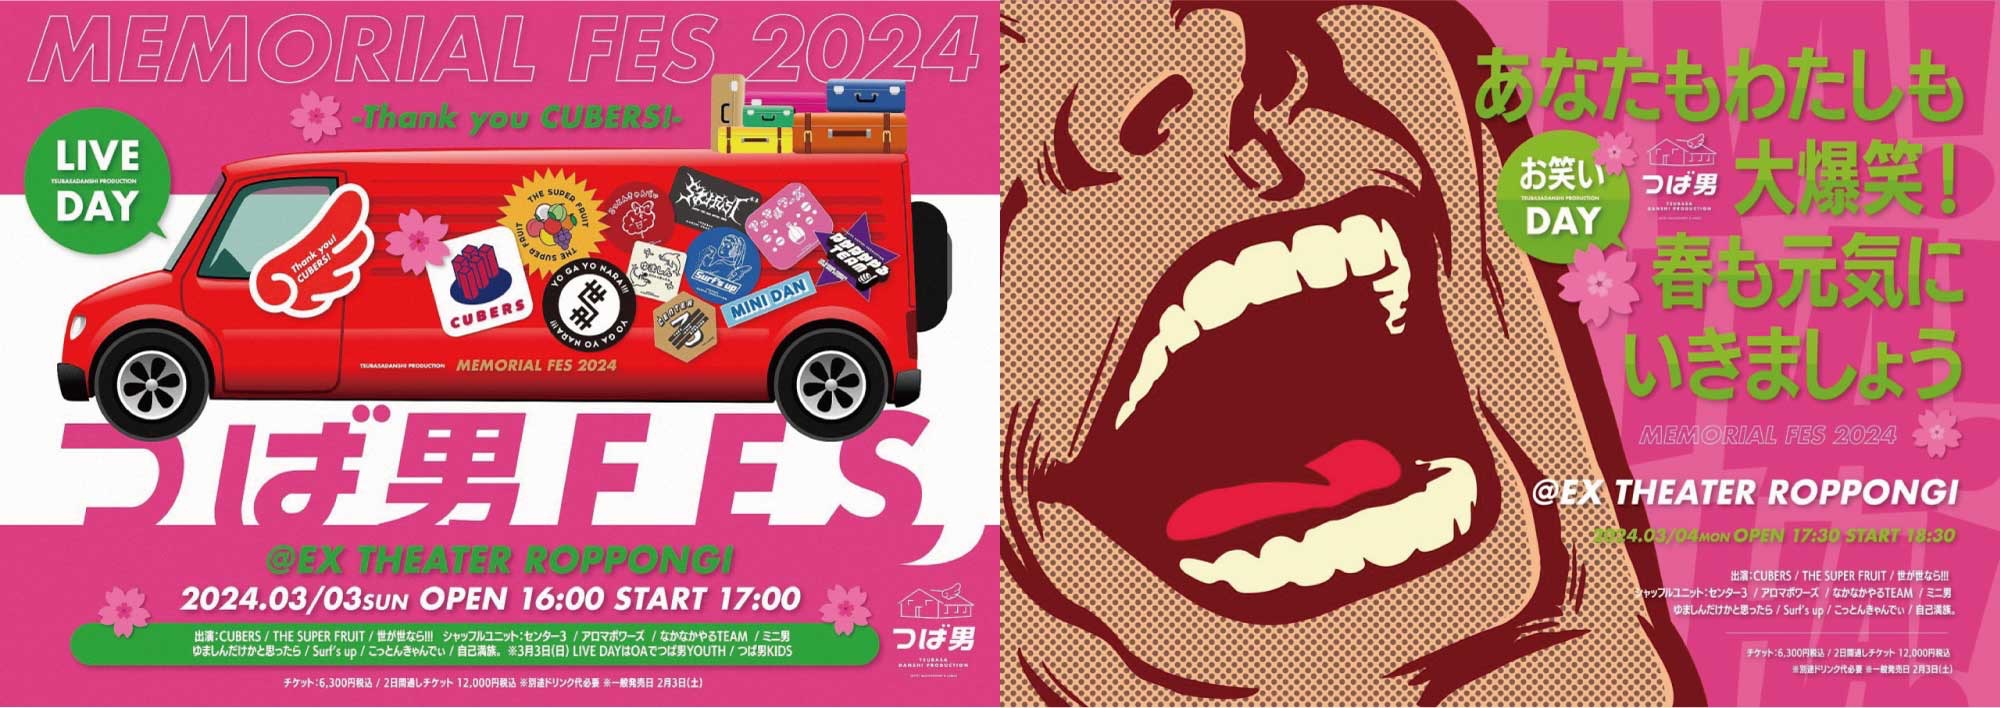 【NEWS”1″】つば男MEMORIAL FES 2024にて「CUBERS LAST LIVE – Final scene and Life goes on – 」 「THE SUPER FRUIT 2nd ONEMAN TOUR – Blue Fruits Tour2024 -」 「世が世なら!!! 人生敗者復活戦ツアー!!! – 裏・天下一武道会2024- 」 手売りチケット販売＆つば男総勢18名お見送り会実施決定！(2024.02.28更新)